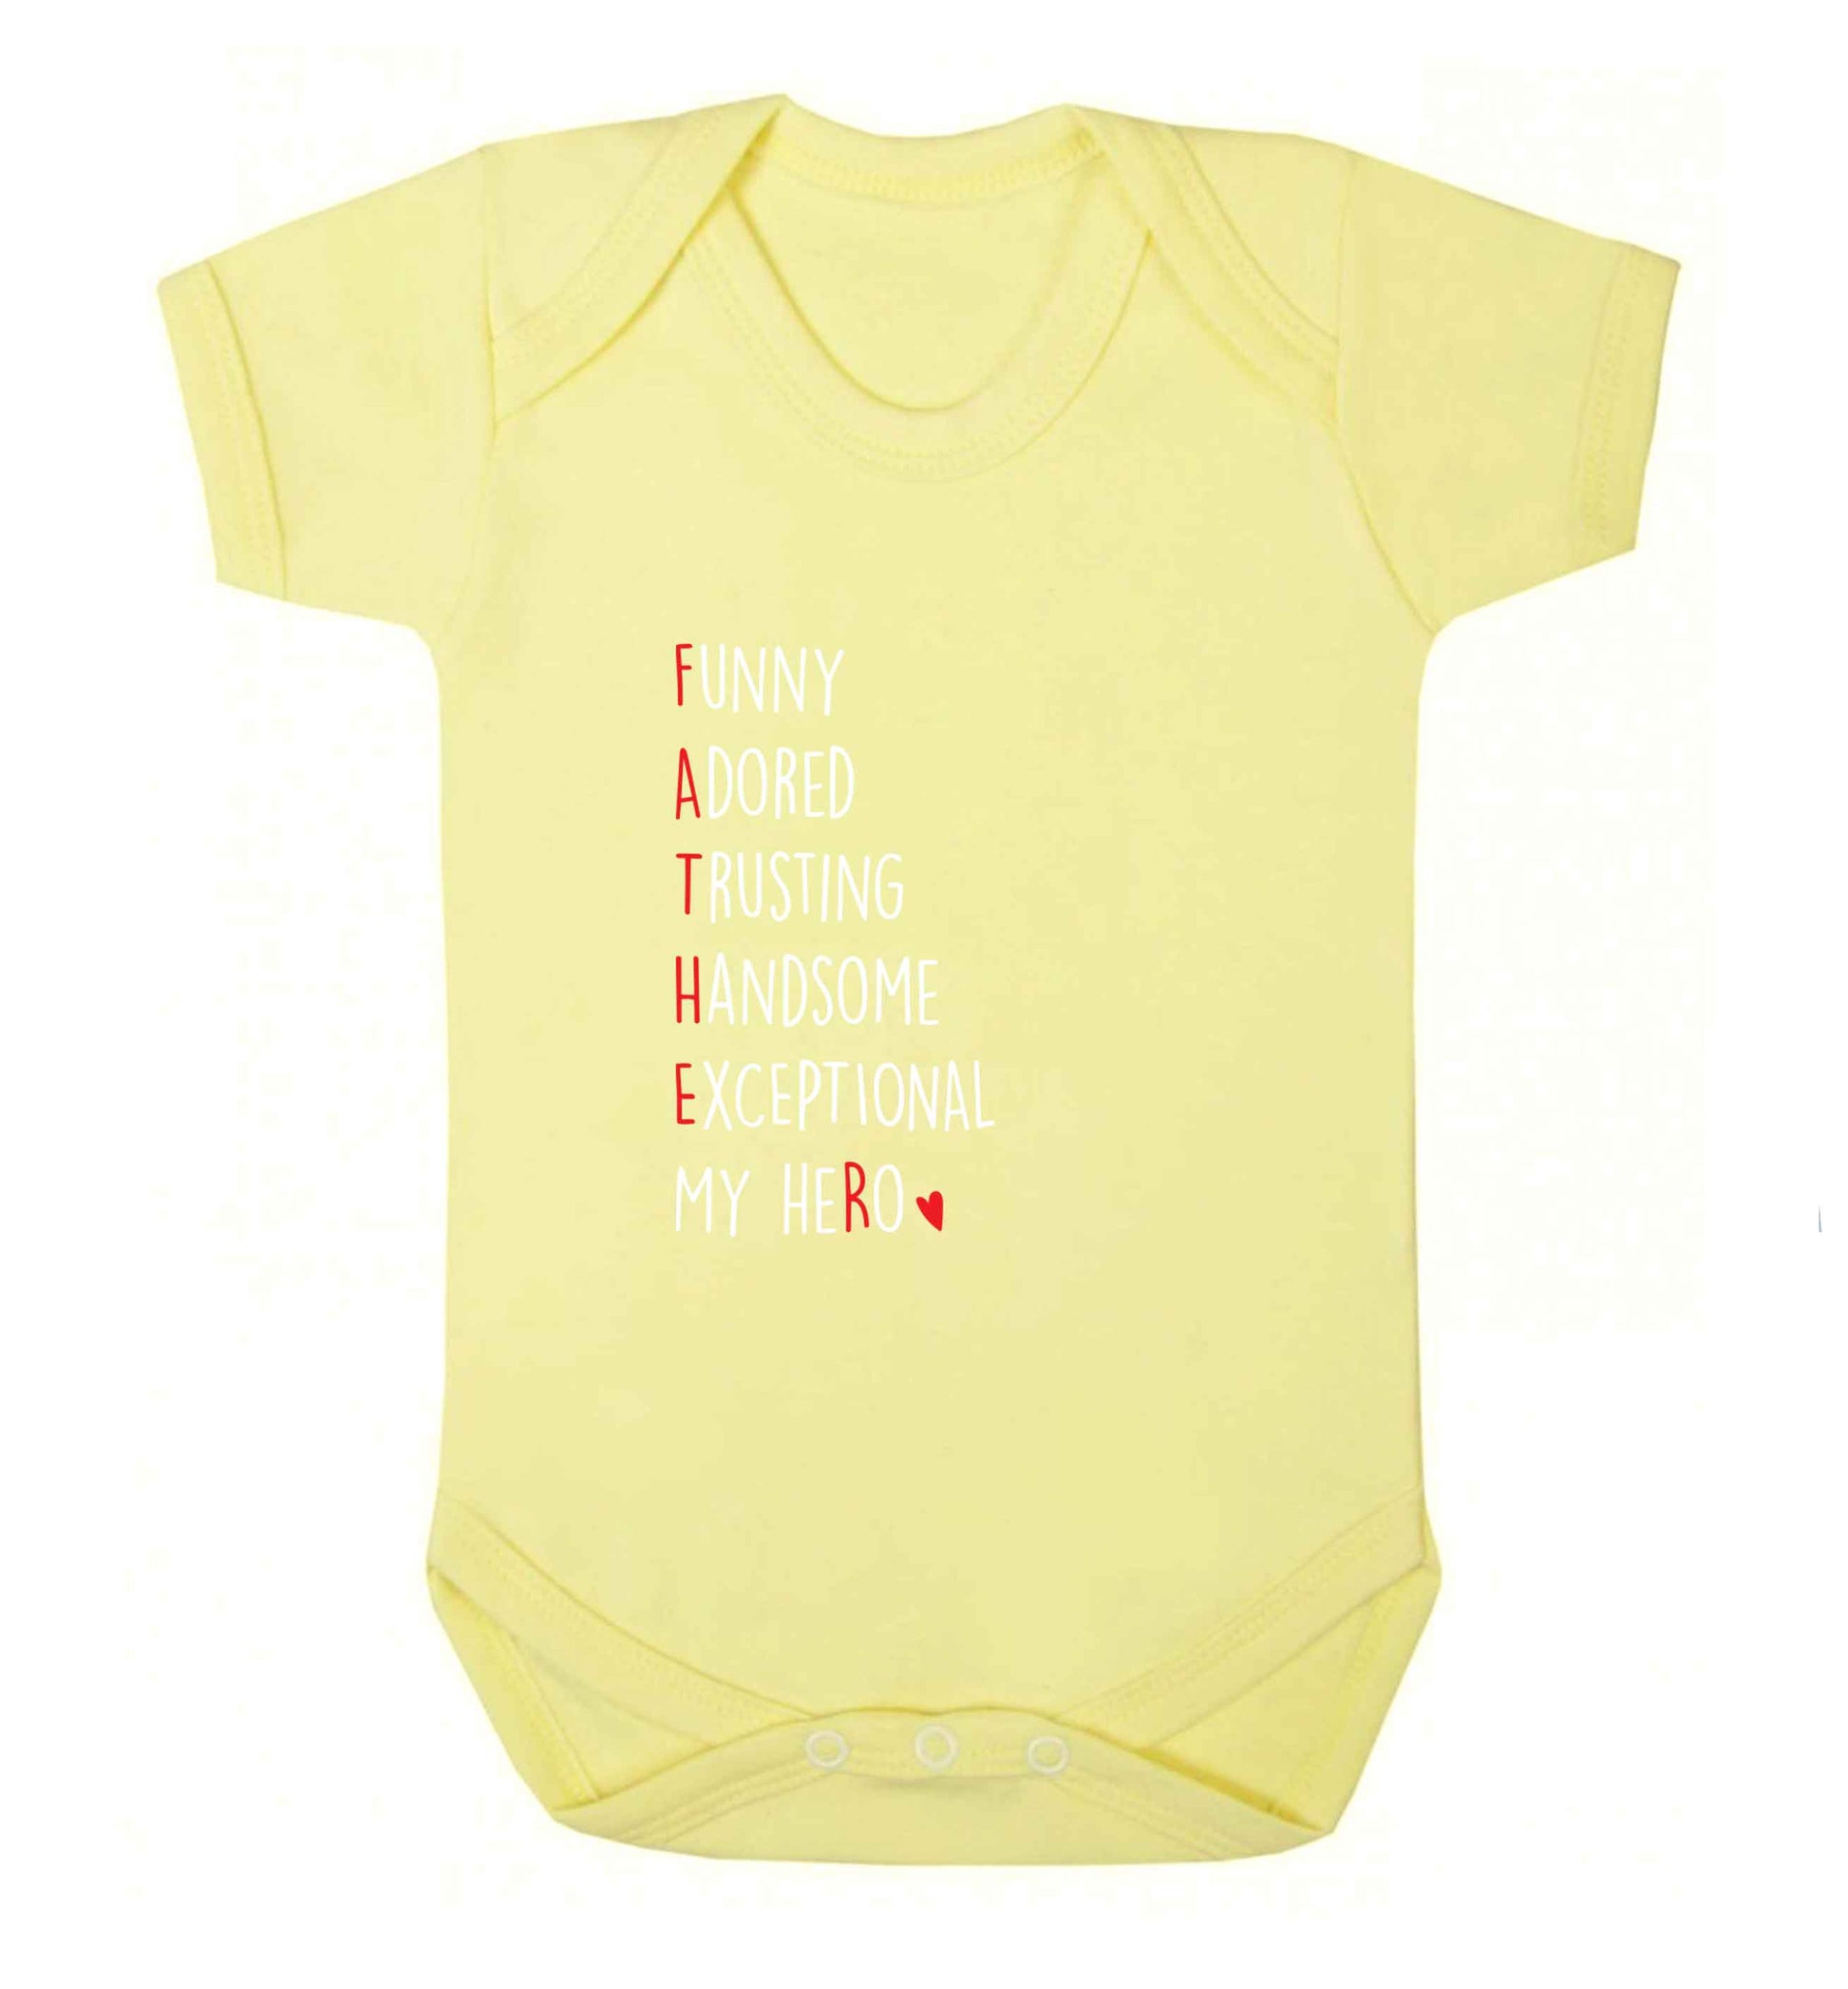 Father meaning hero acrostic poem baby vest pale yellow 18-24 months